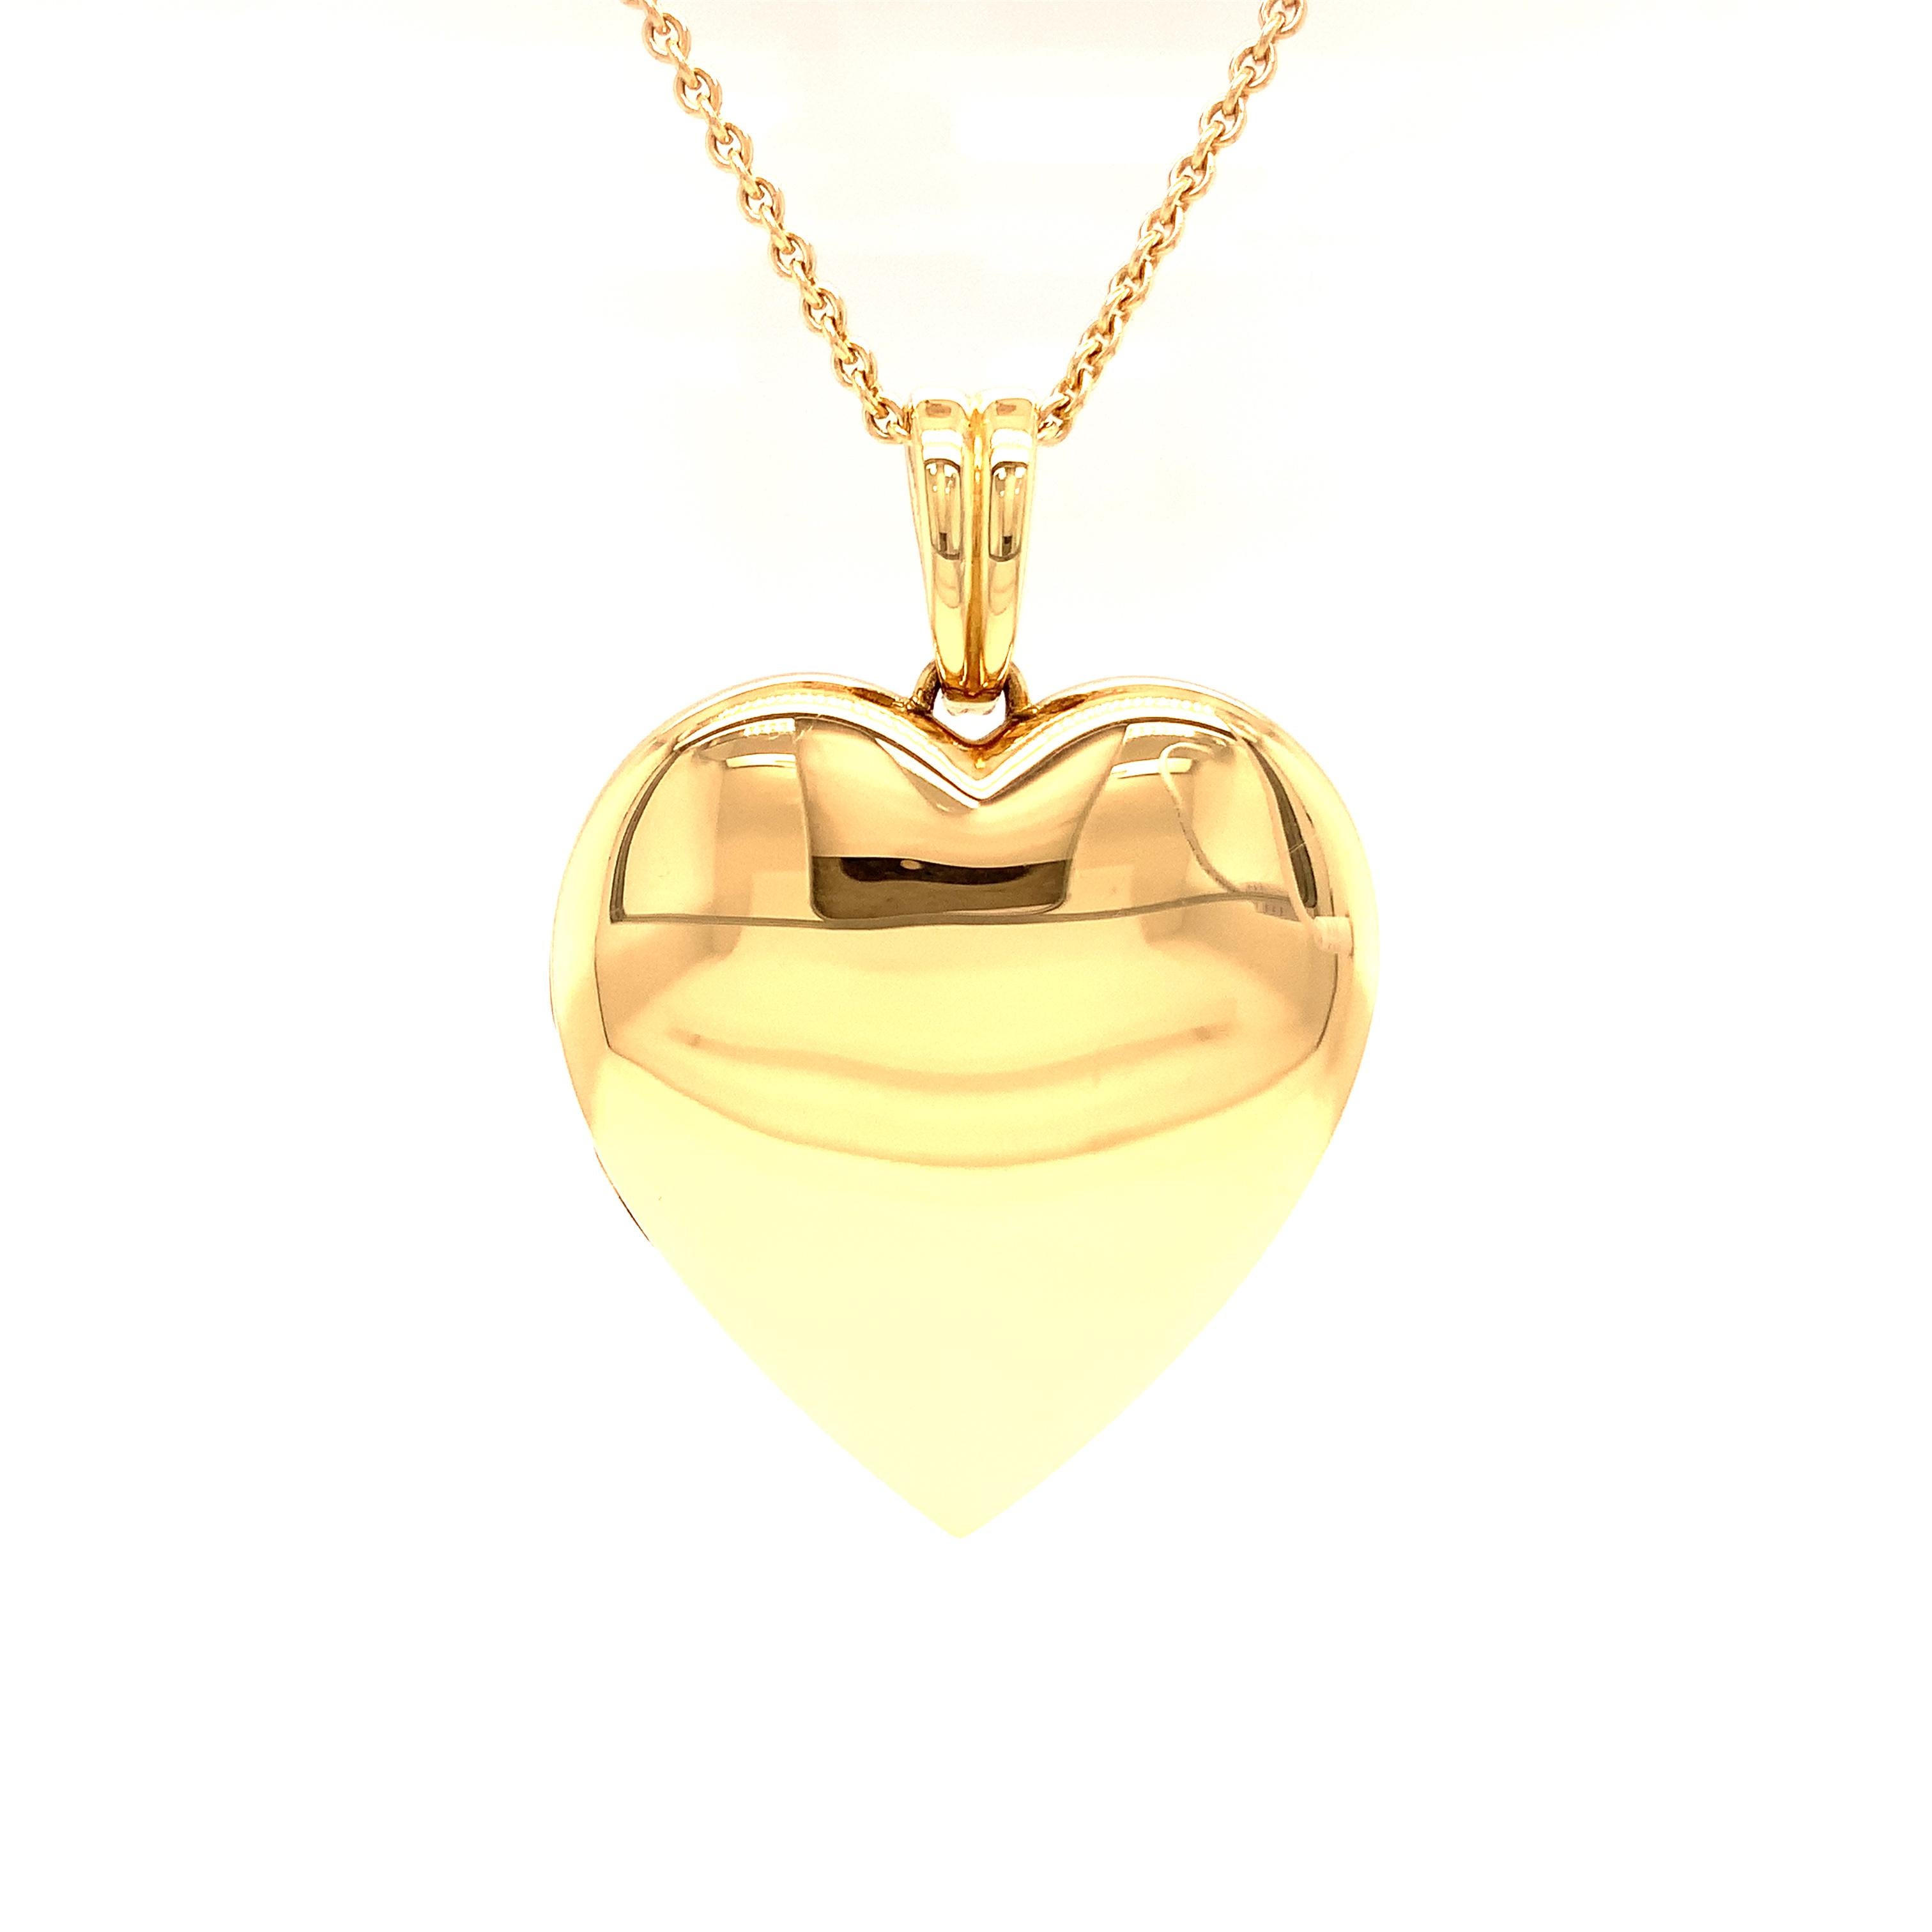 Customizable Polished Heart Shaped Pendant Locket 18k Yellow Gold 37 mm x 34 mm For Sale 1